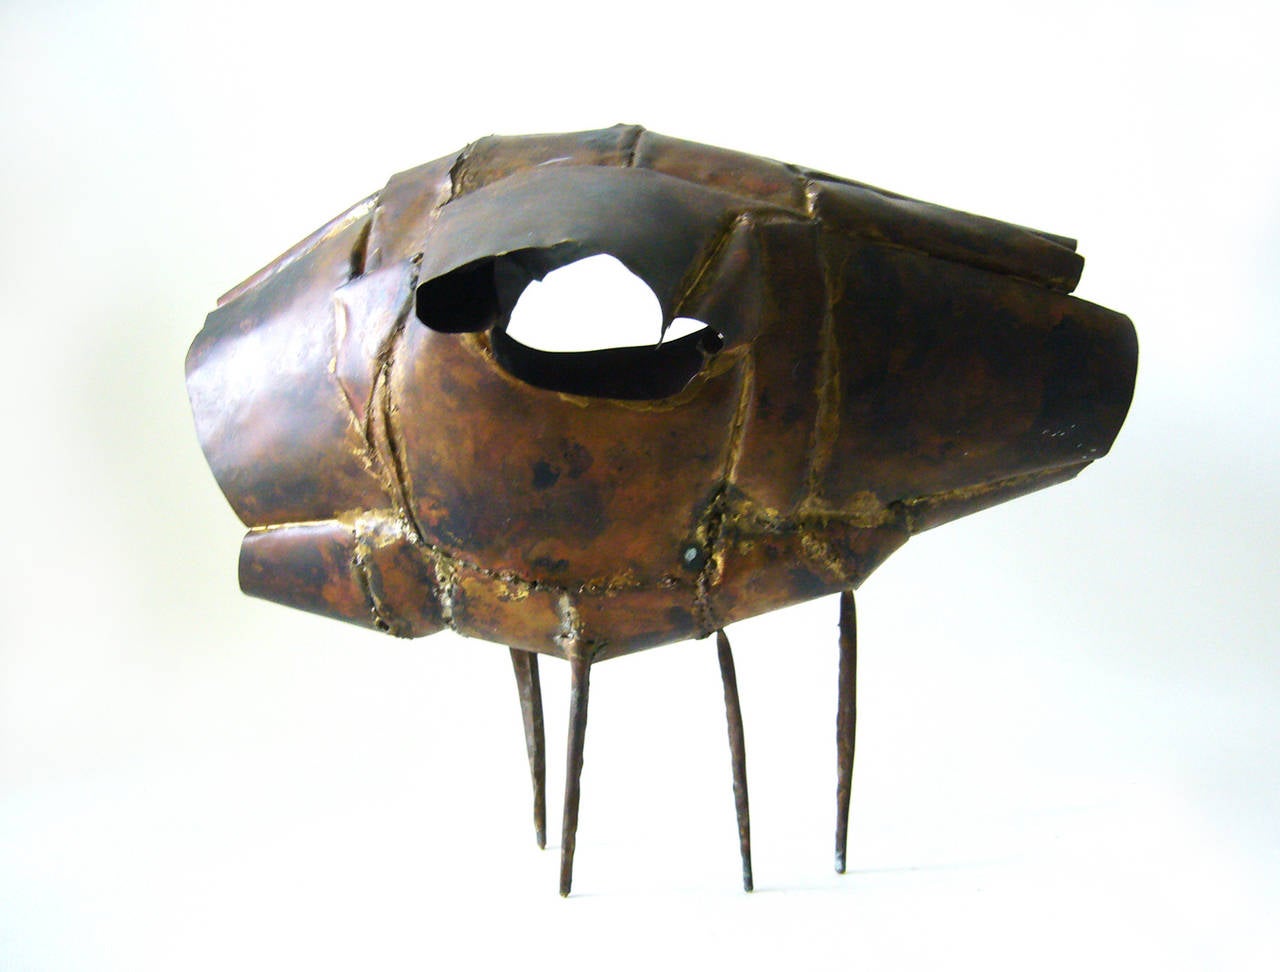 A handmade, patchwork metal sculpture created by Richard Takao Okuda of Altadena, California. Reminiscent of Lee Bontecou's structural sculptures and paintings. Sculpture measures: 12.5